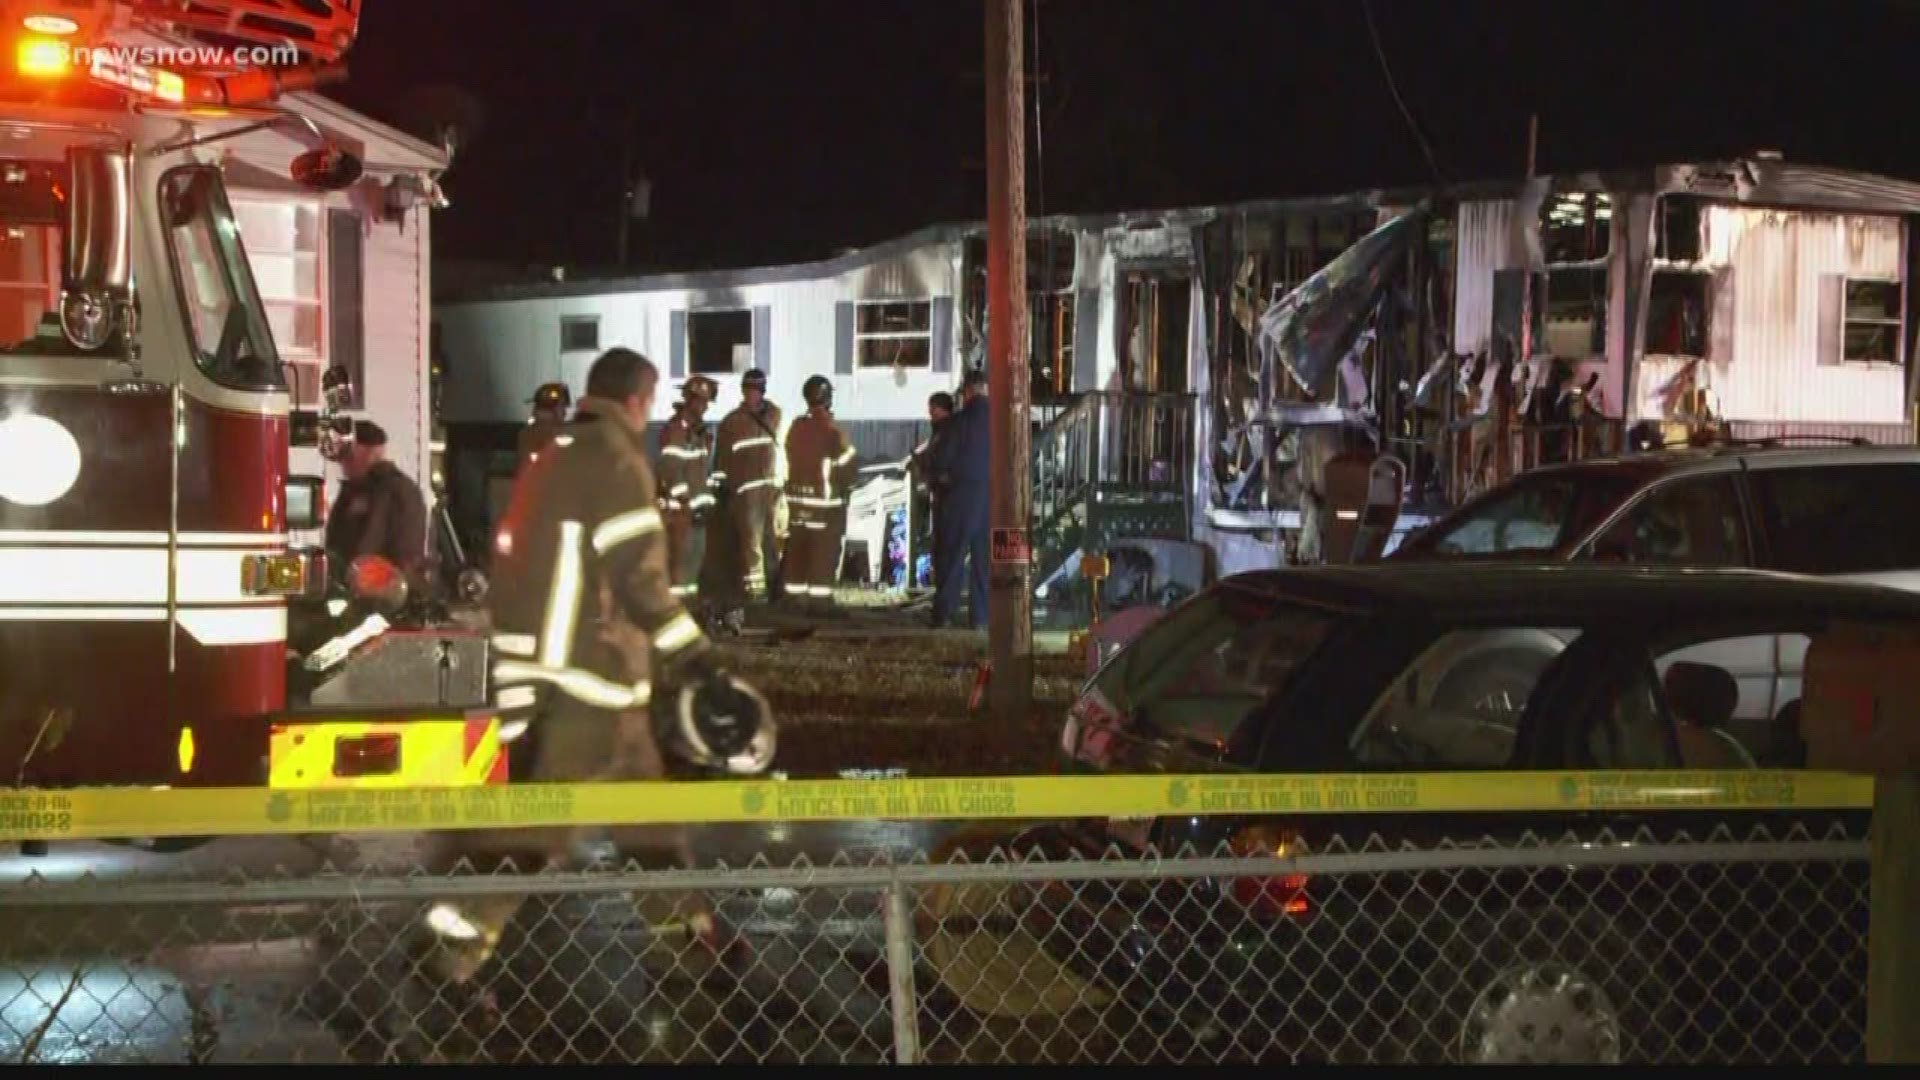 A family of five was hospitalized after being rescued from their burning mobile home. Two children, ages 2 and 5, were pulled from the fire by a firefighter while the parents carried out their 7-year-old daughter.